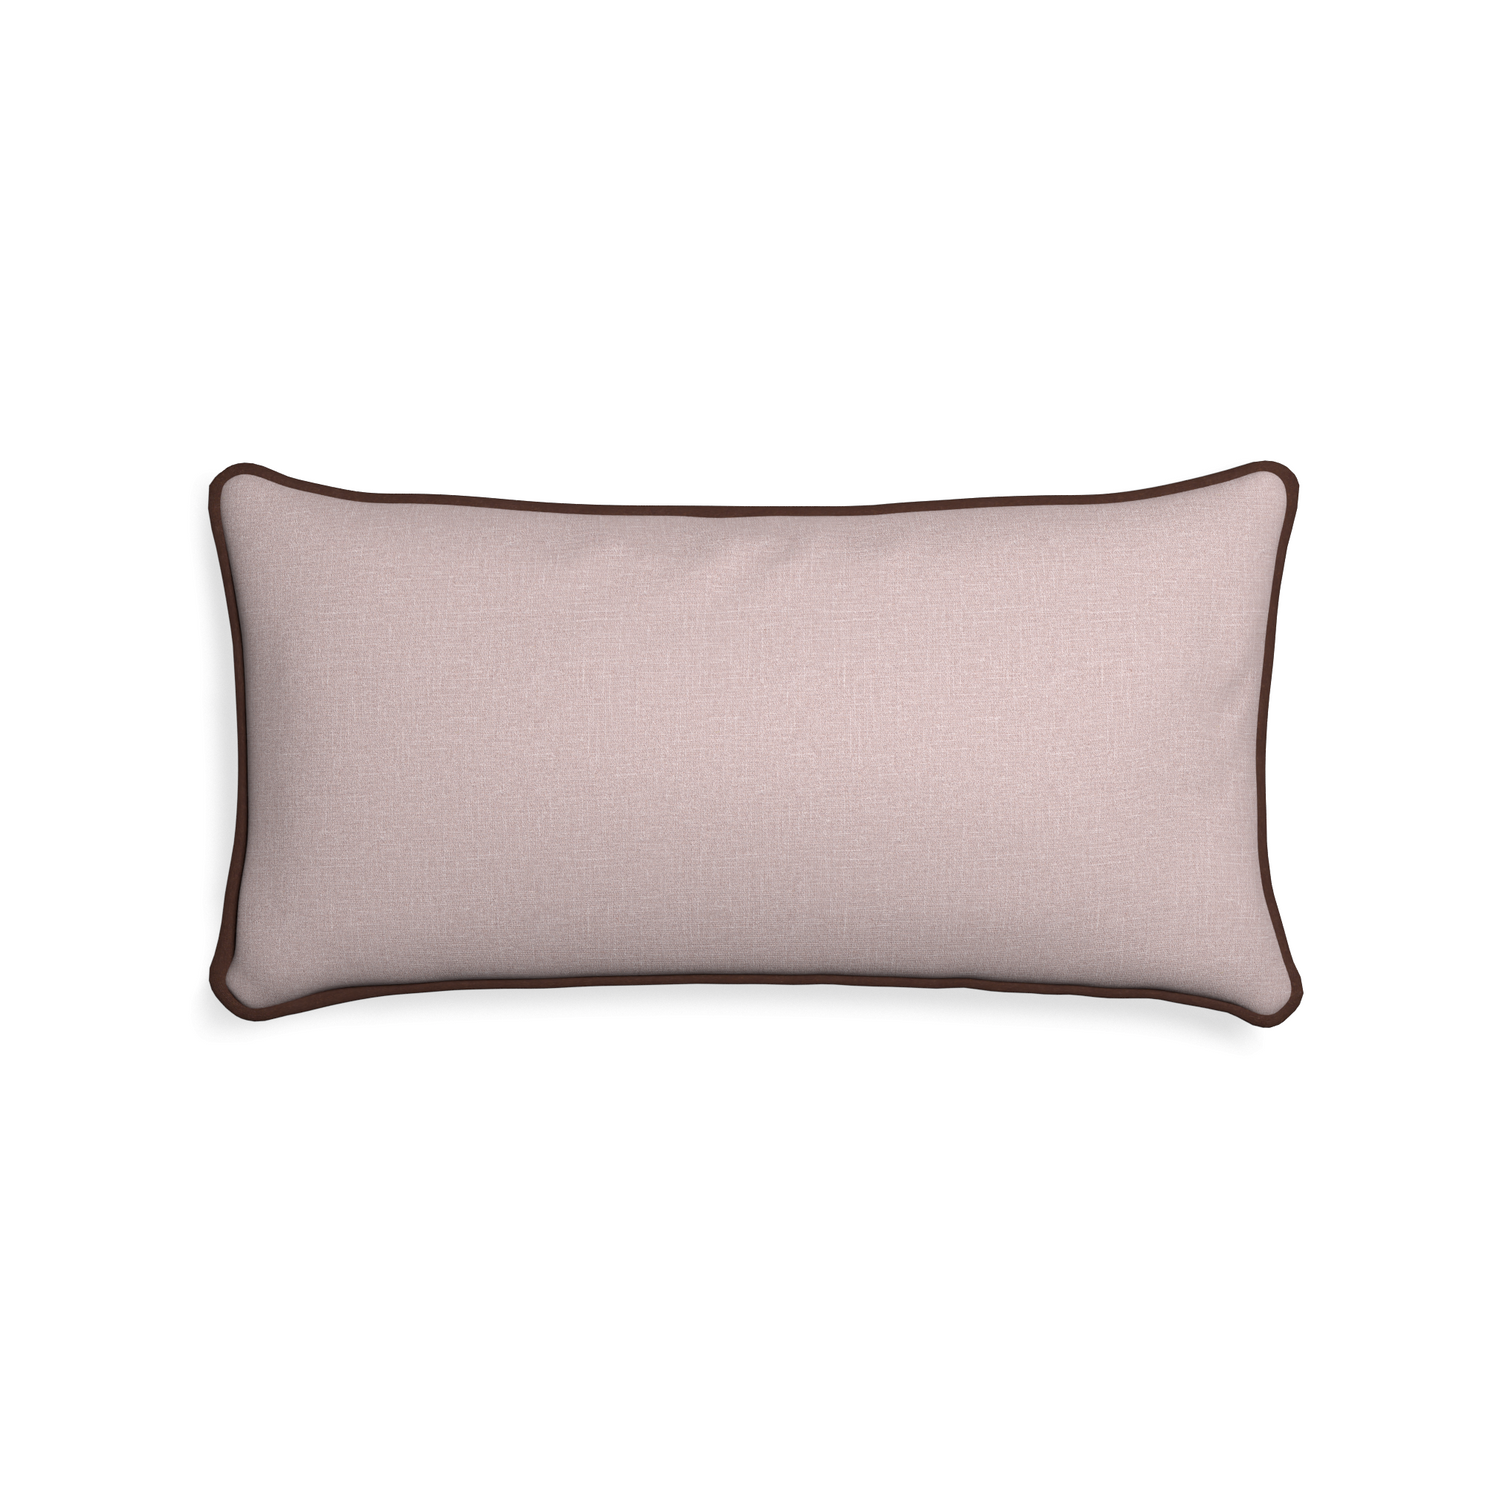 Midi-lumbar orchid custom mauve pinkpillow with w piping on white background